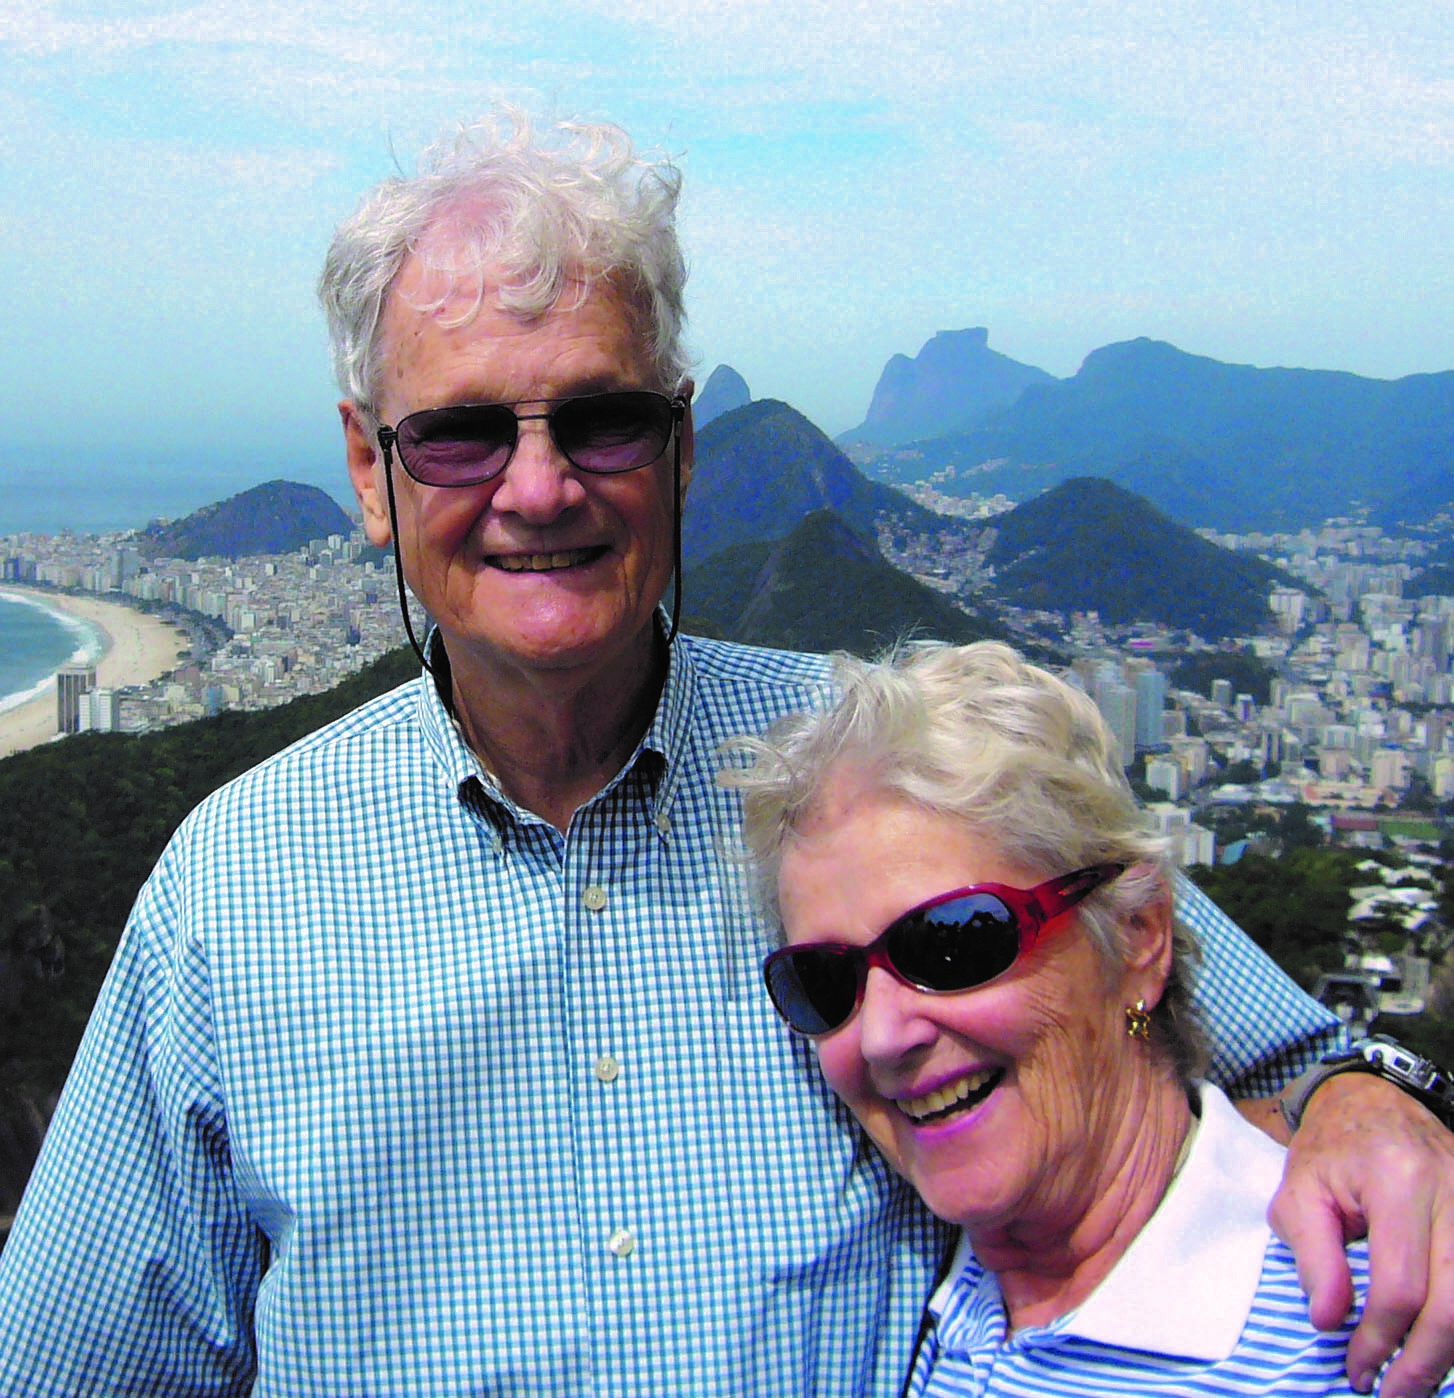 George and Jean Hutchison, an elderly couple in blue and white shirts and sunglasses, smiling, with a mountainous city view behind them